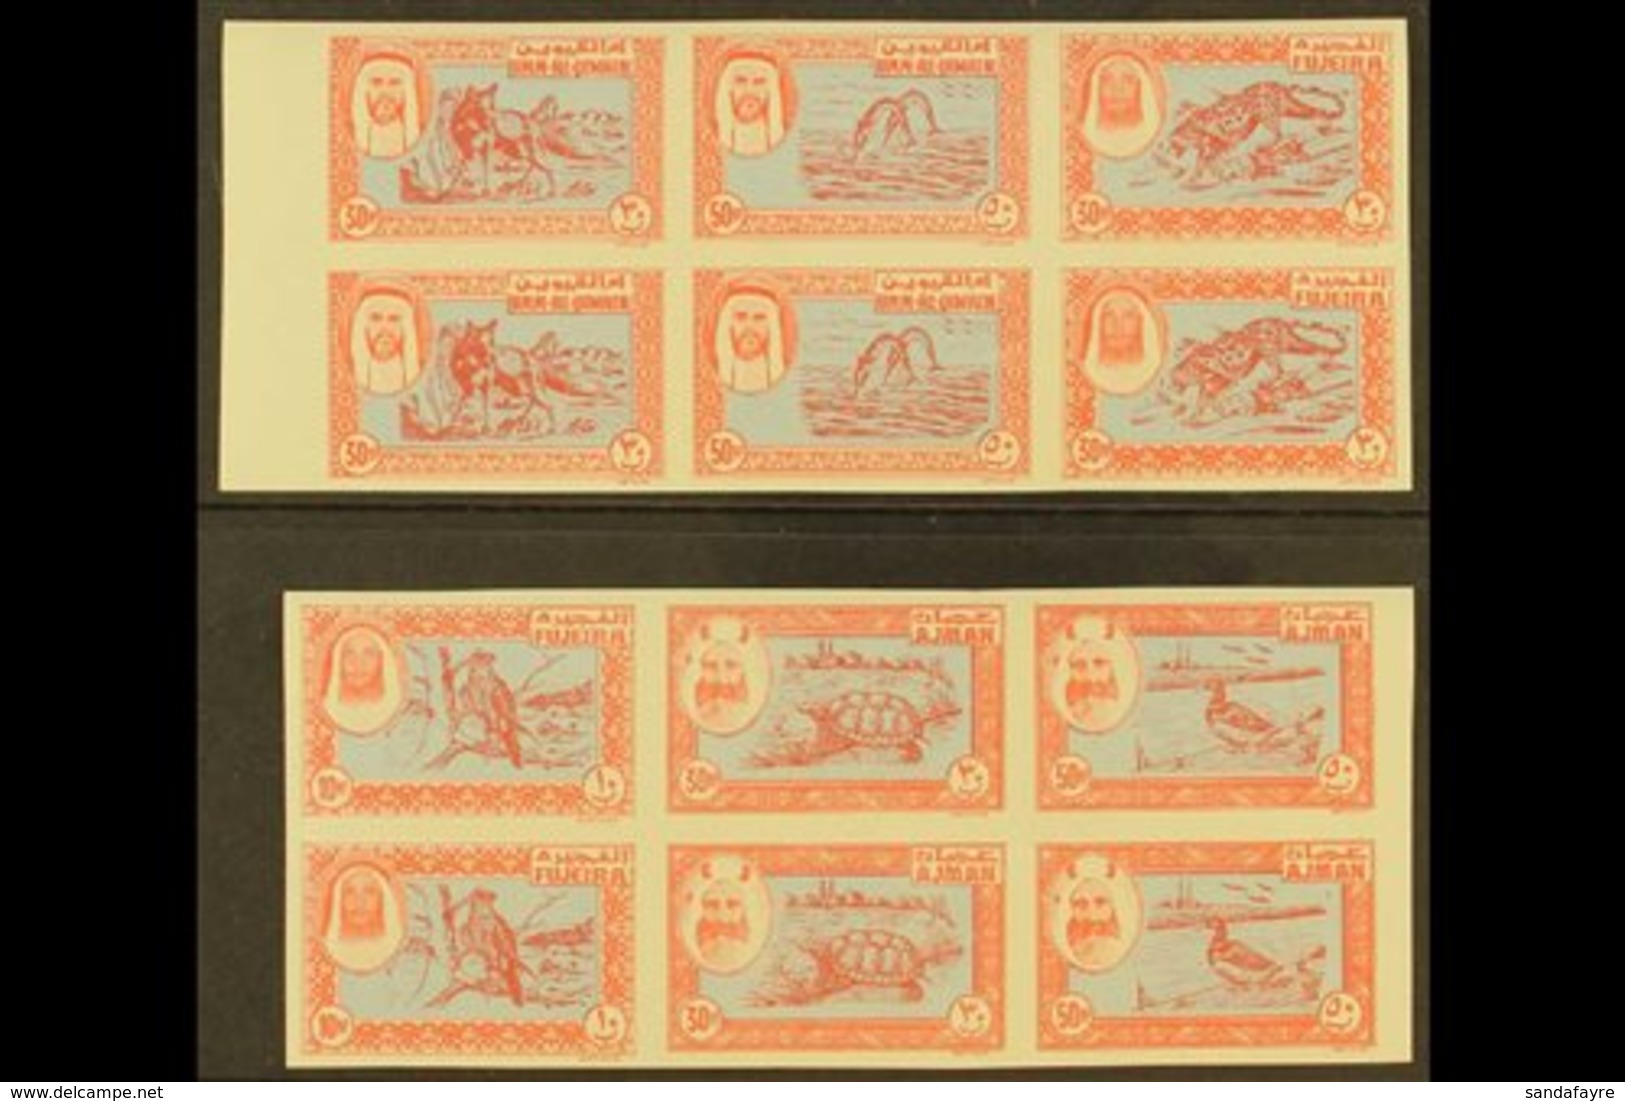 FLORA & FAUNA TRUCIAL STATES - UNISSUED DESIGNS 1963 Animals, Blue & Rose, Set Of 10np, 30np & 50np Values In Two, Se-te - Unclassified